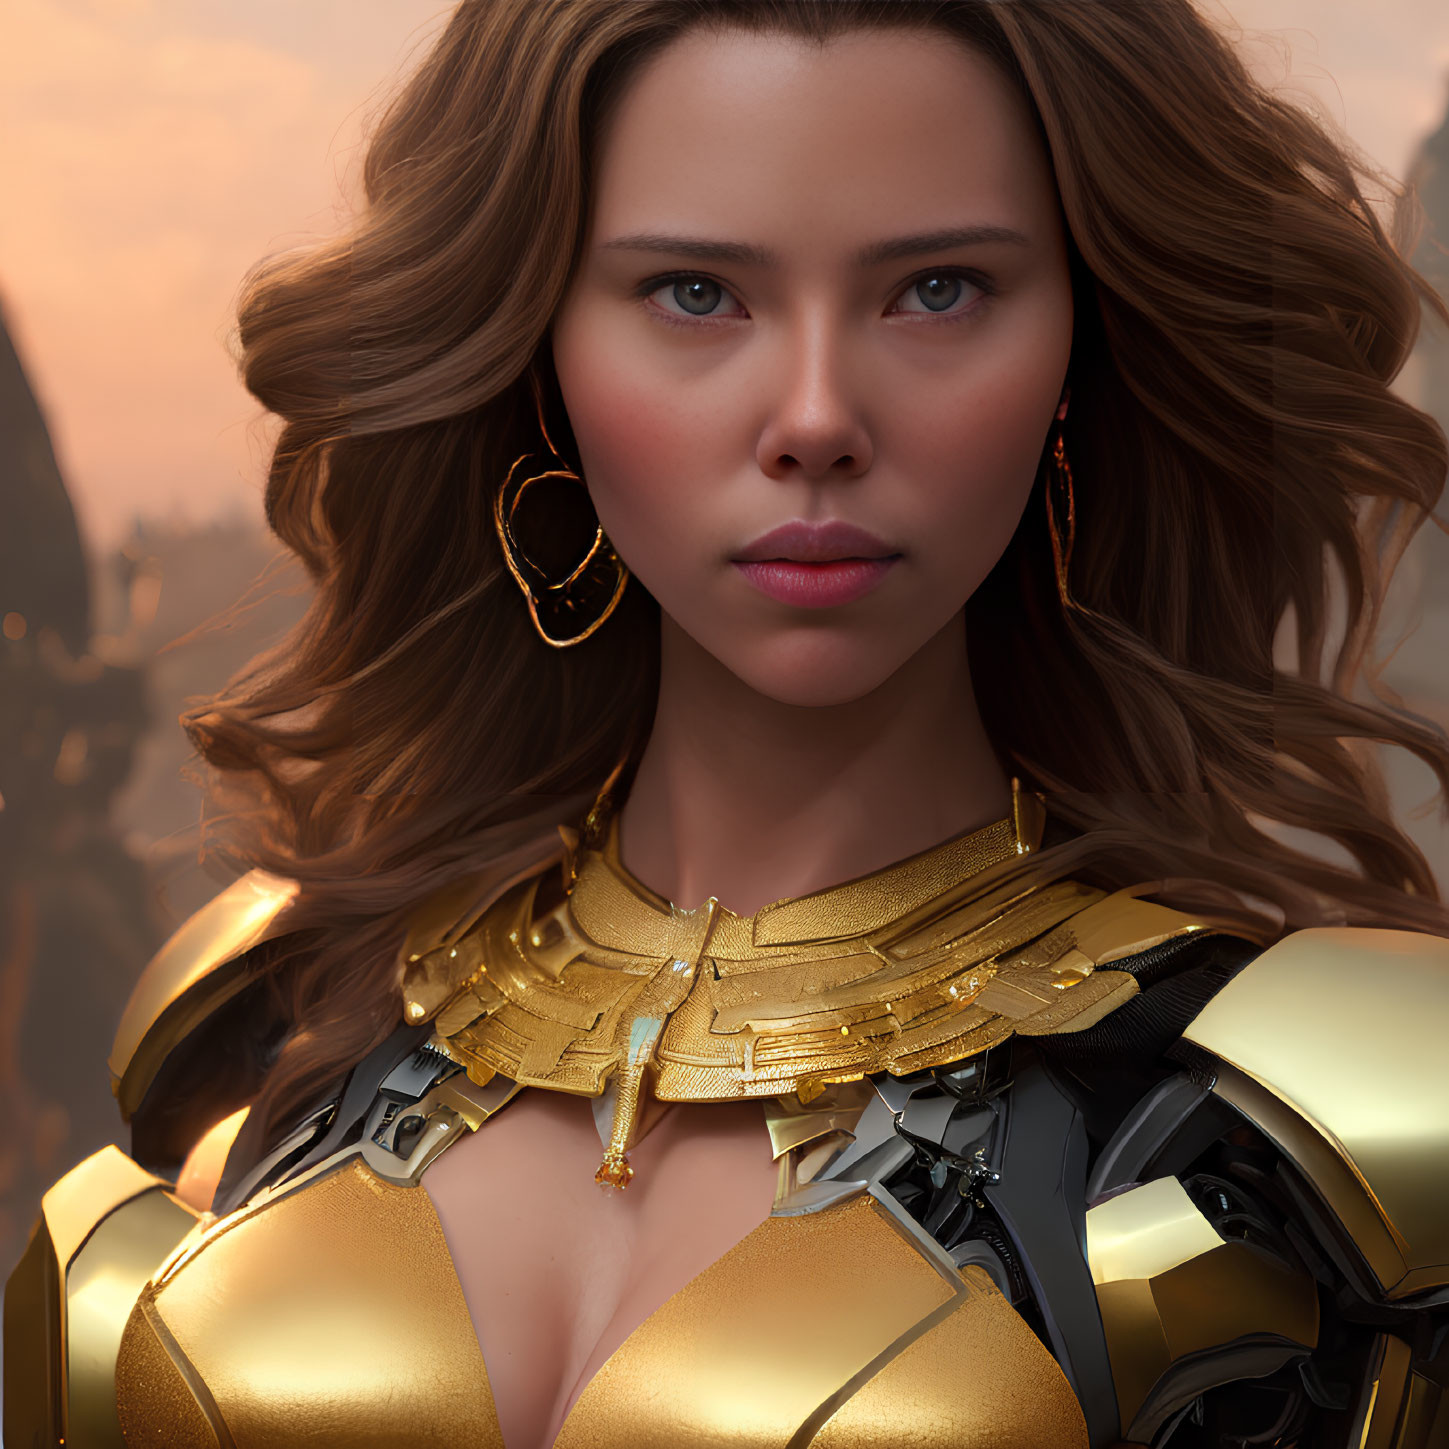 Golden armor woman with flowing hair and hoop earrings in focused expression on amber backdrop